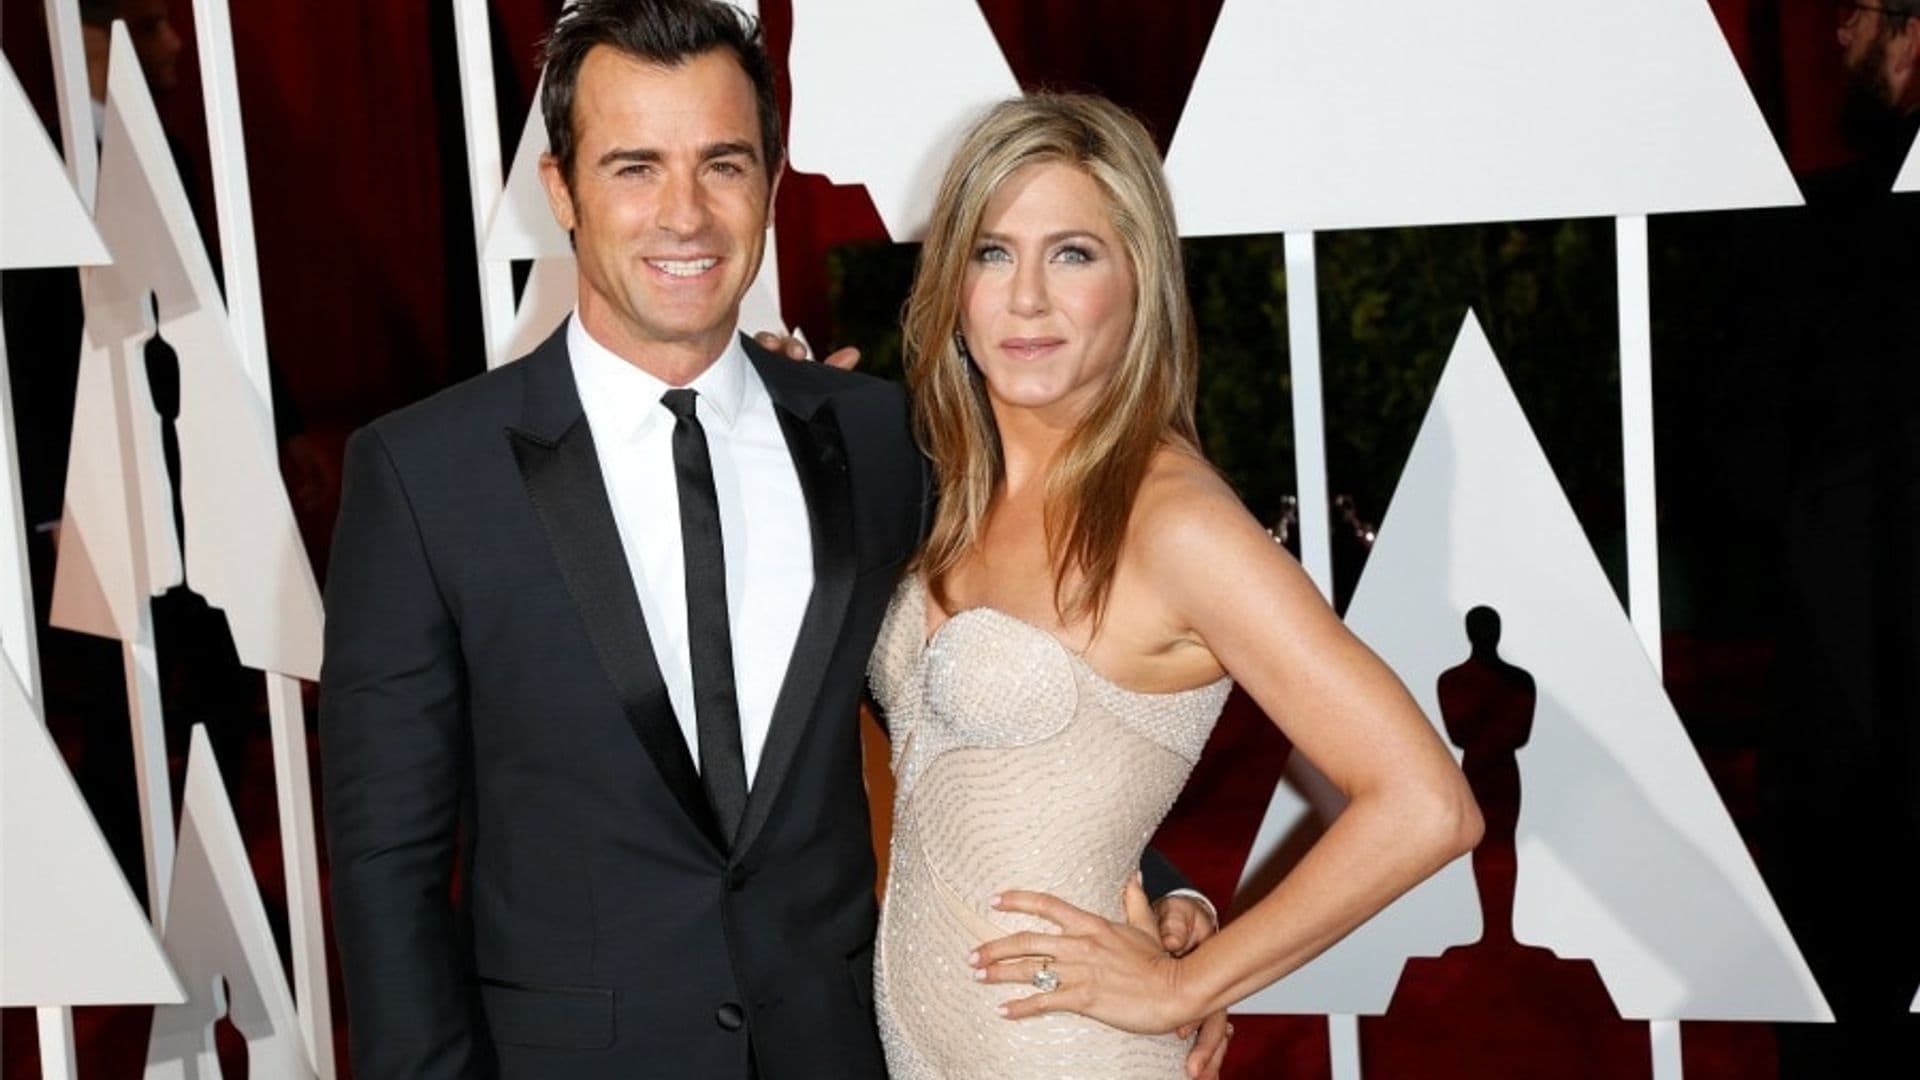 The actor says he doesn't mind being called "Mr. Jennifer Aniston."
Photo: PA